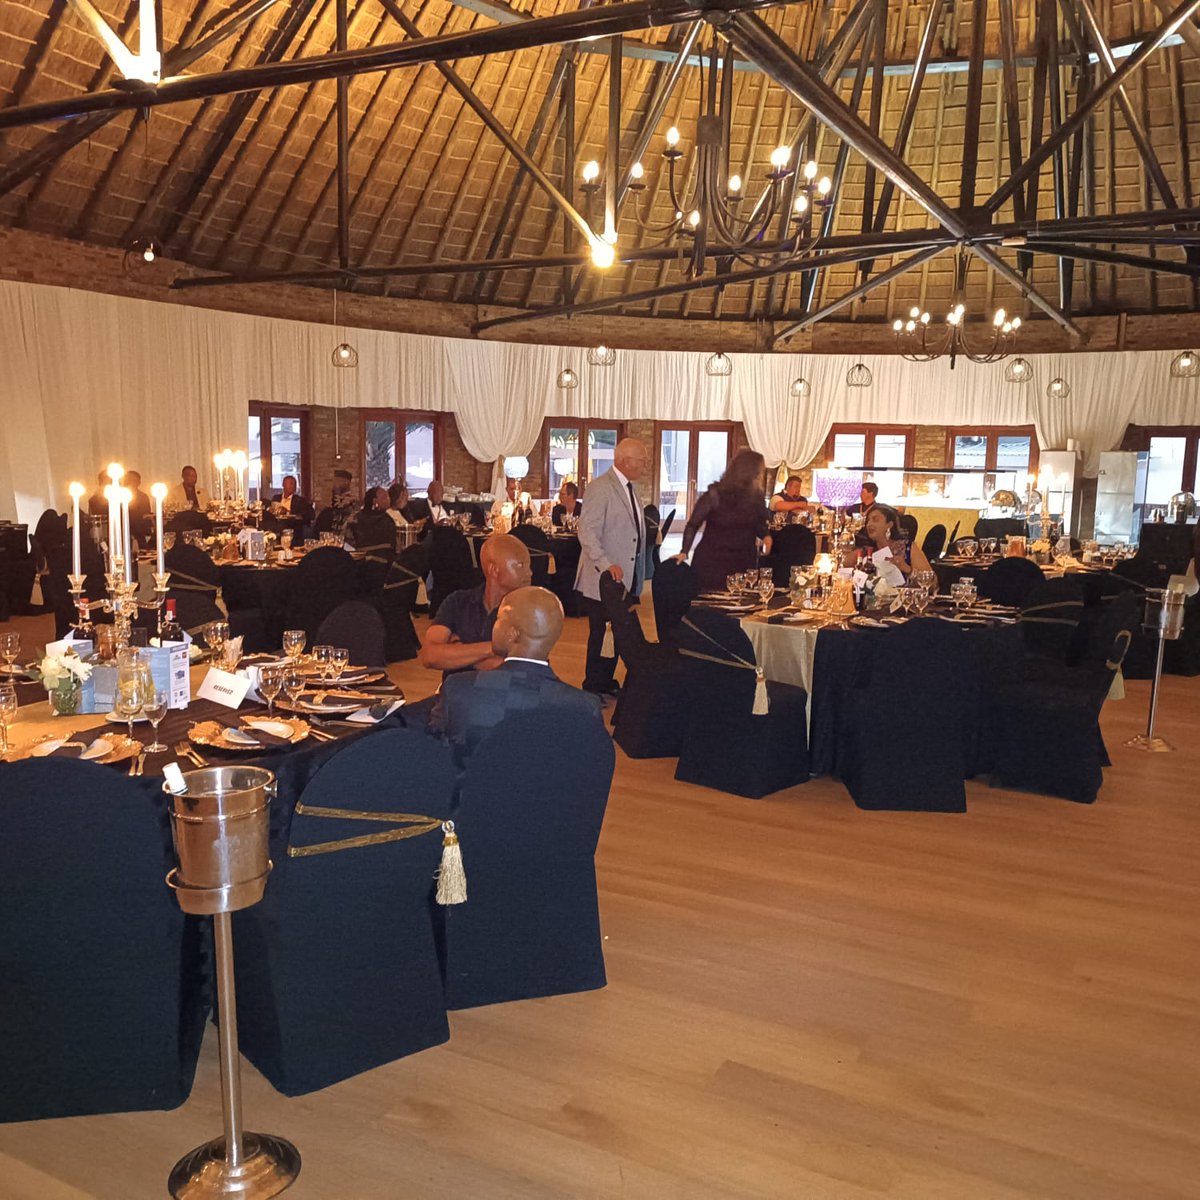 The QS Conference Gala Dinner is in full swing as delegates arrive, dressing exquisitely.

#Galadinner
#QSConference2023
#Digitalization
#Builtenvironment
#quantitysurveying